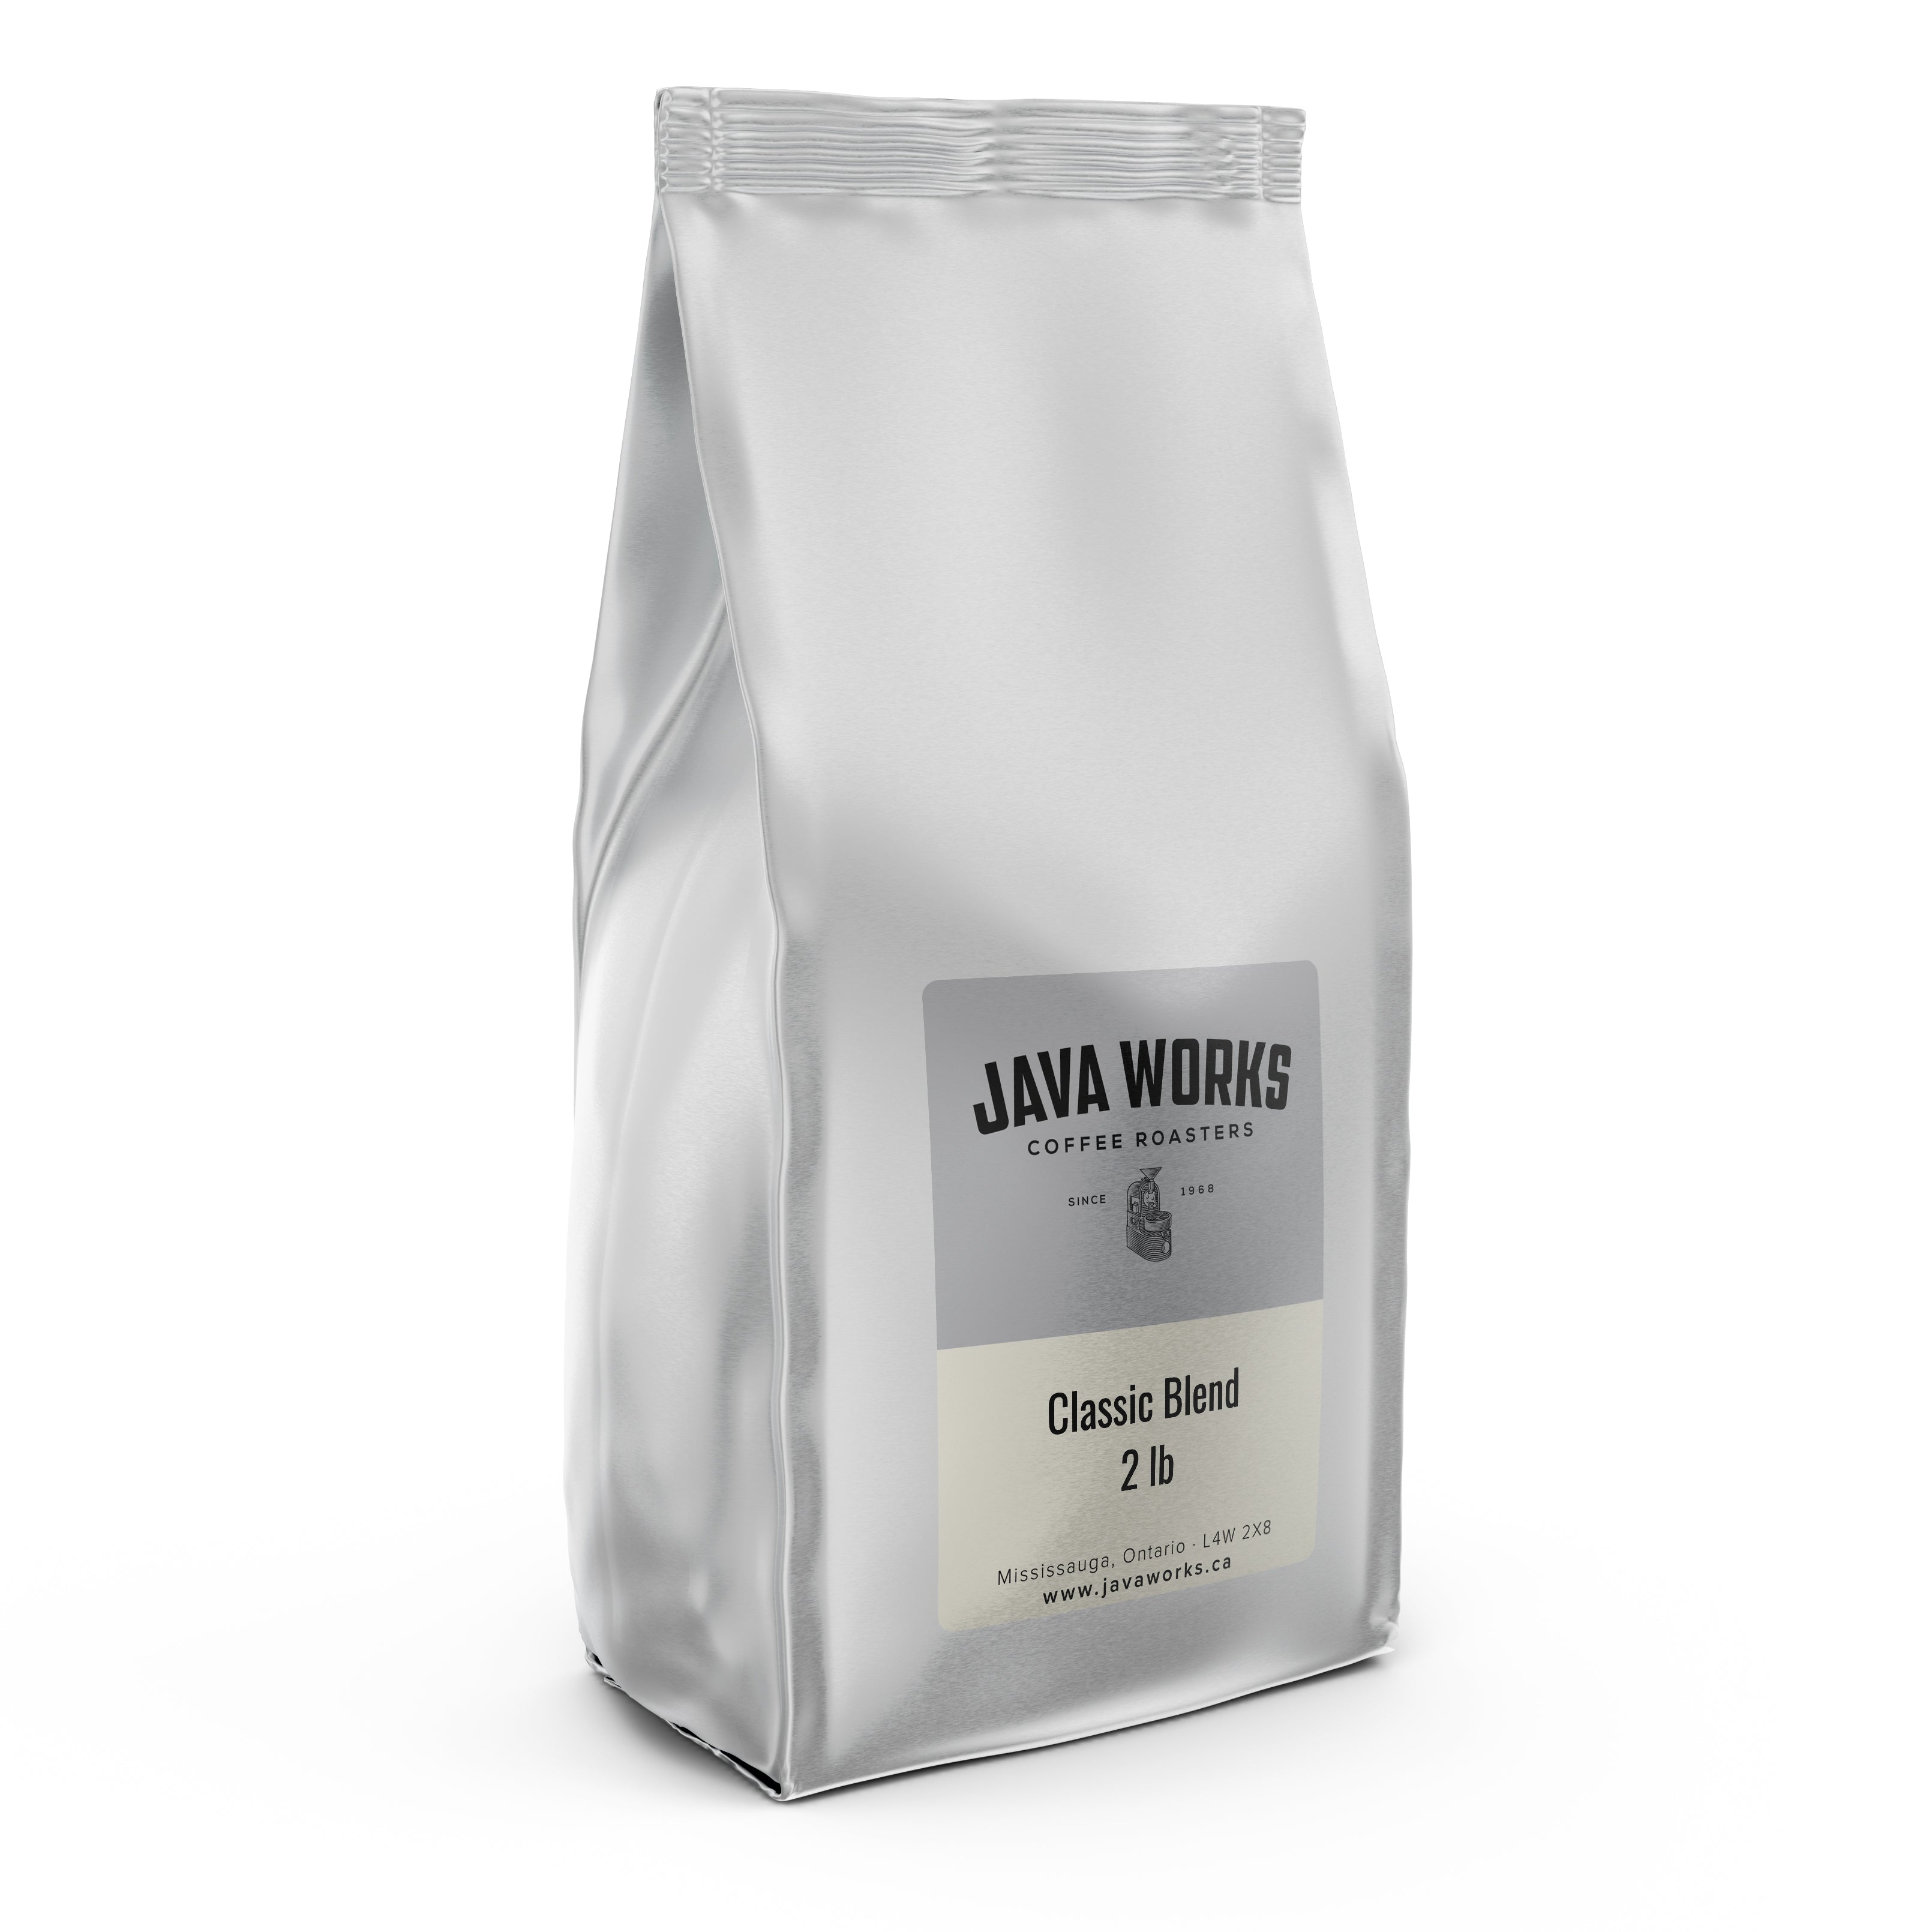 java works classic blend 2lb coffee on white background